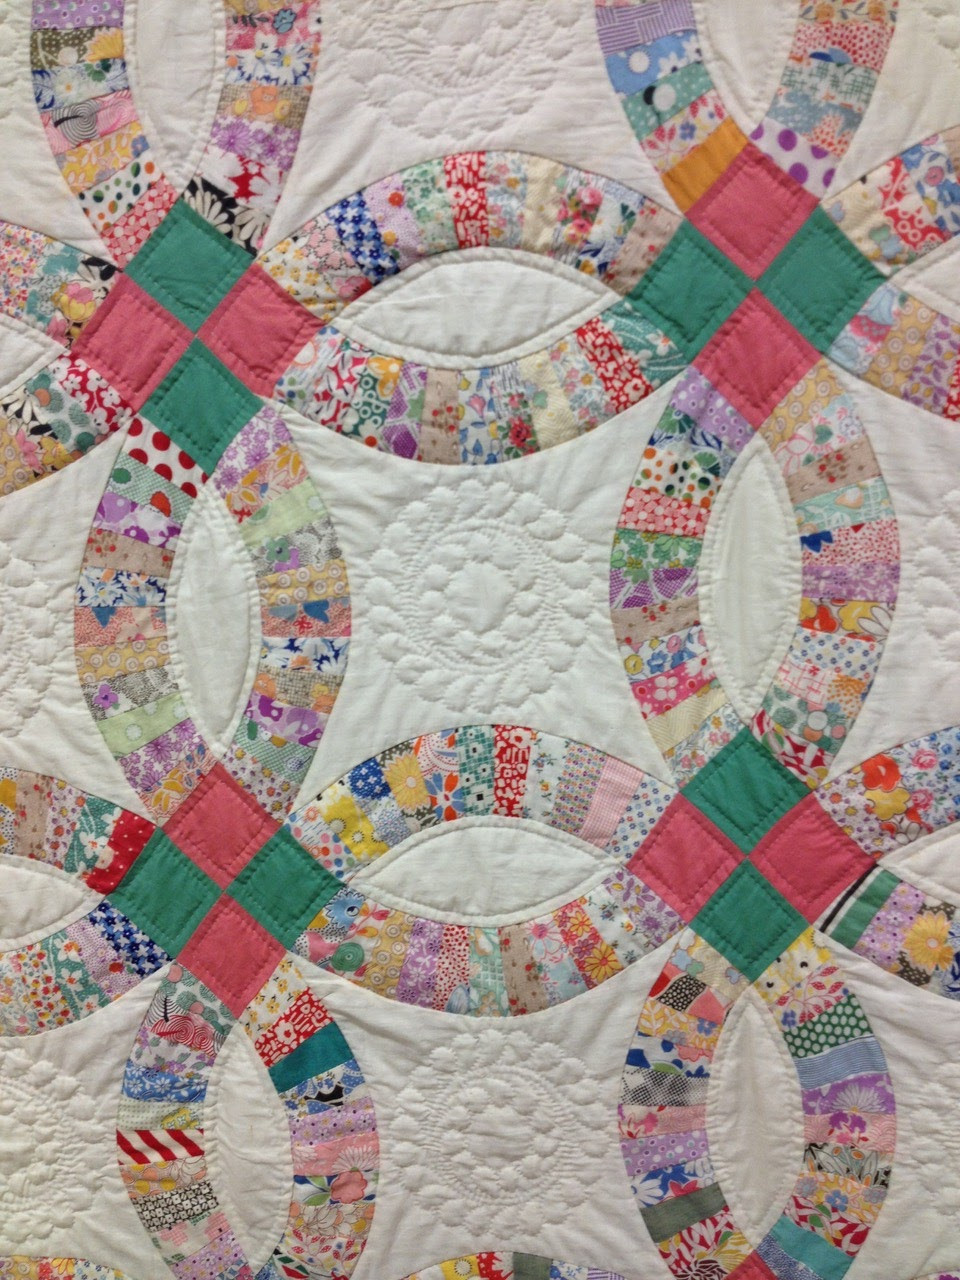 Wedding Ring Quilt
 Wyoming Breezes Vintage Quilt Double Wedding Ring